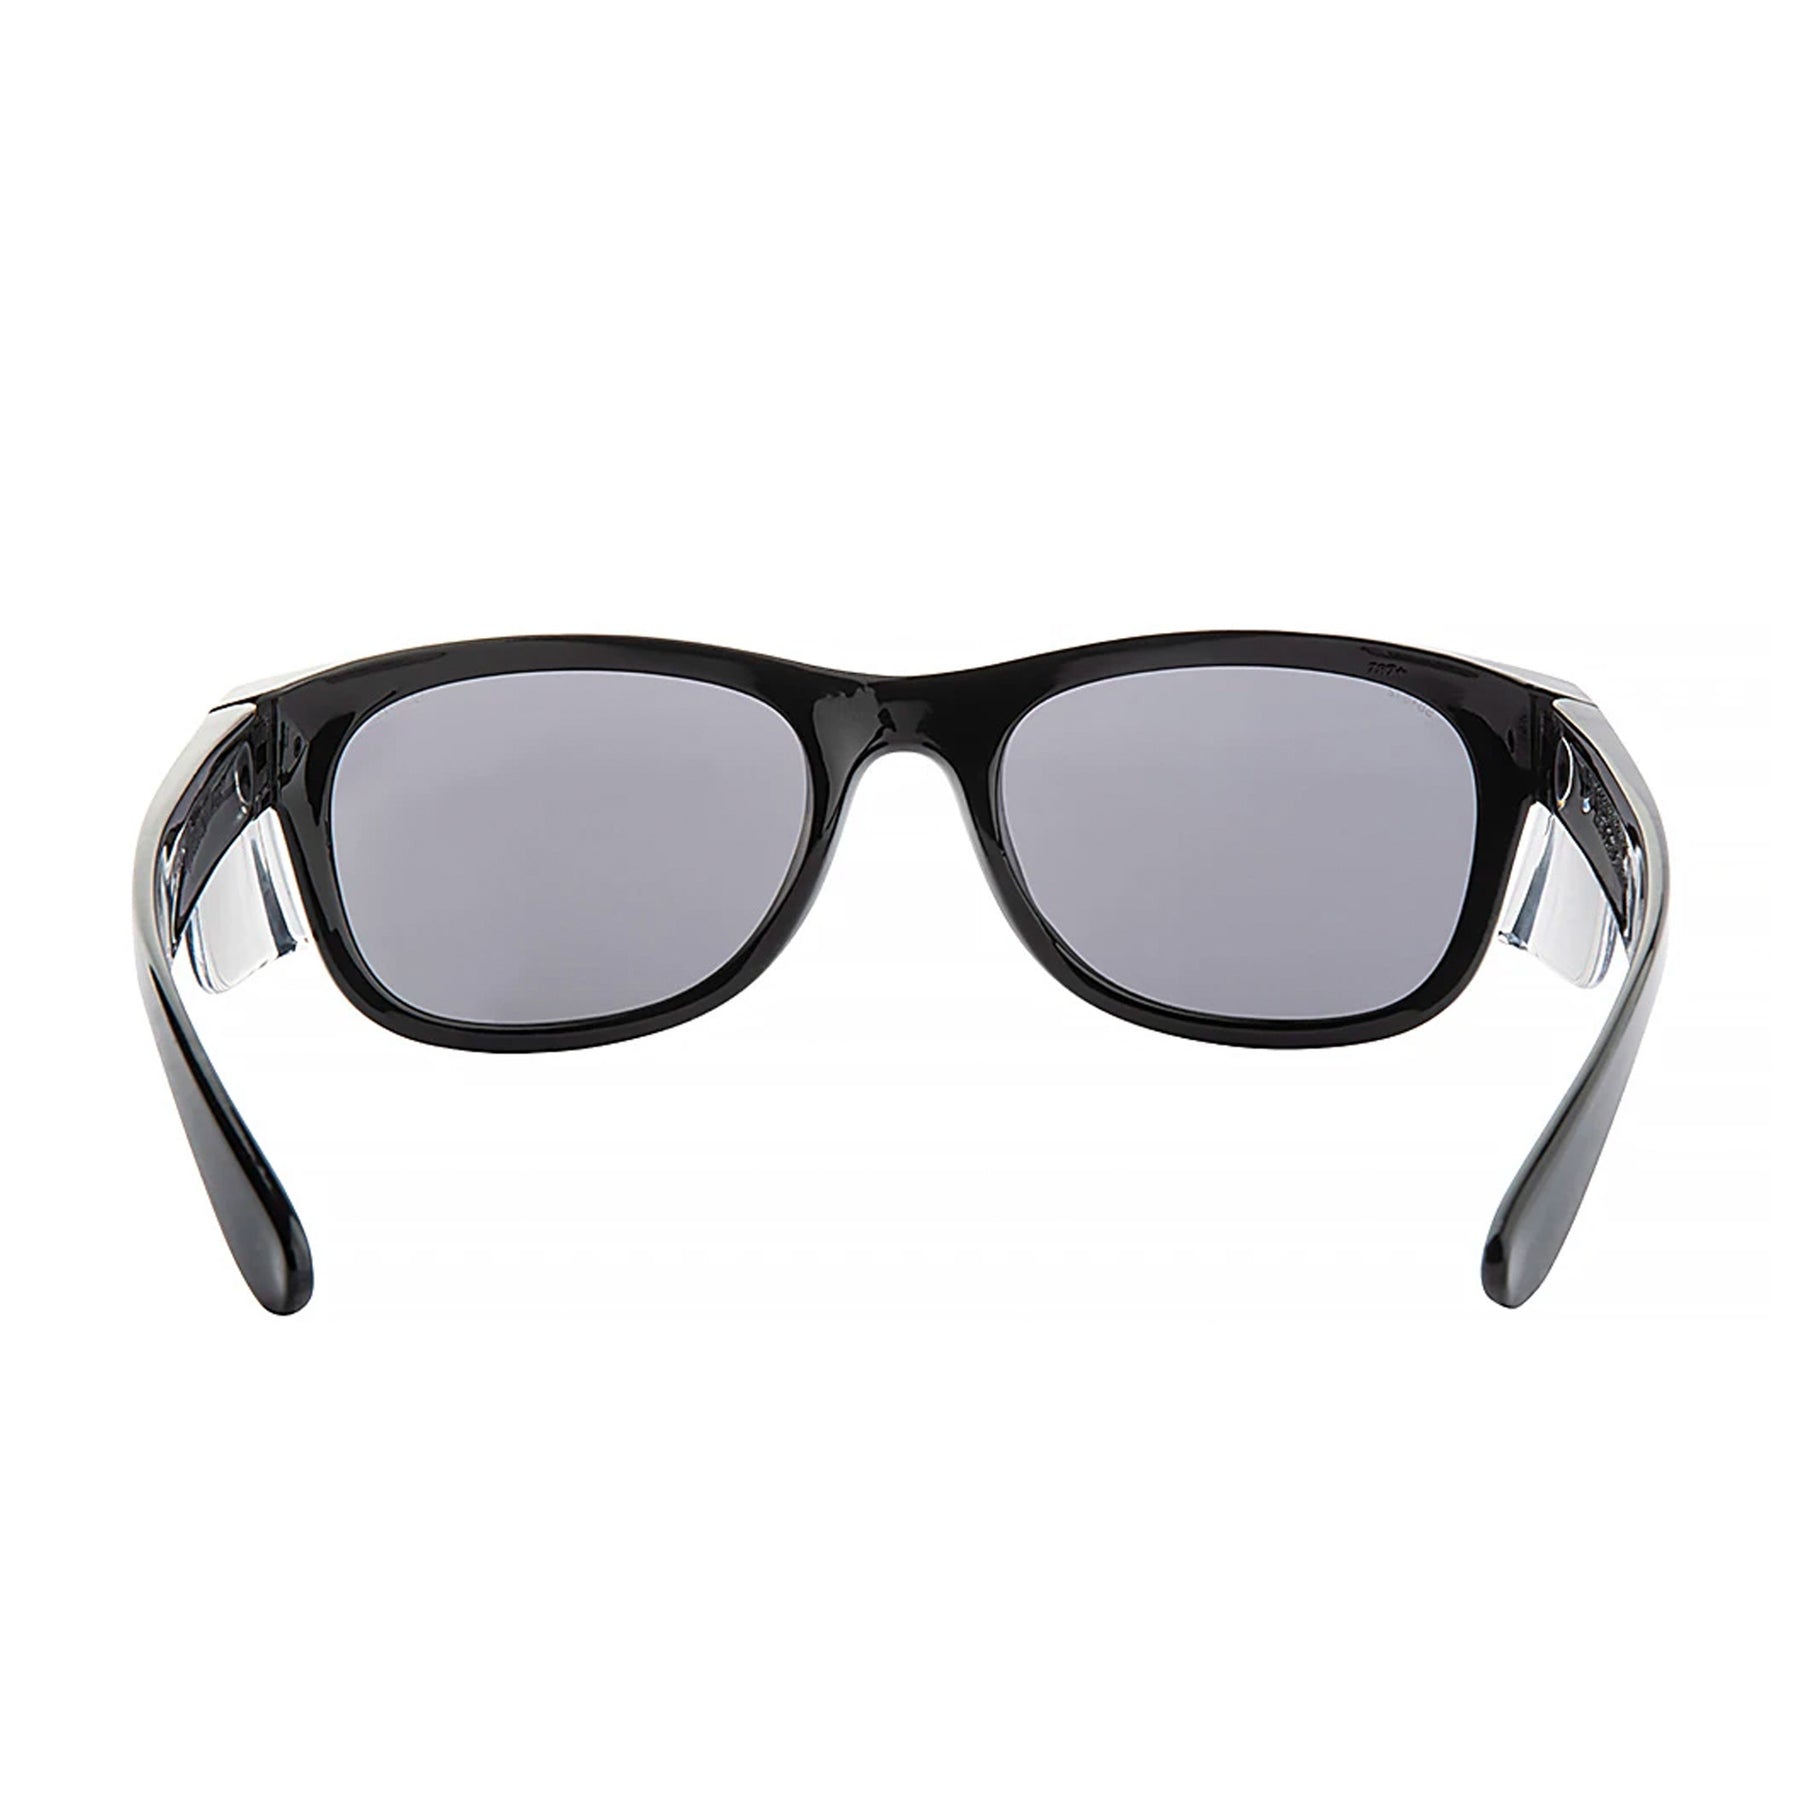 safe style classics glasses with black frame and polarised lens